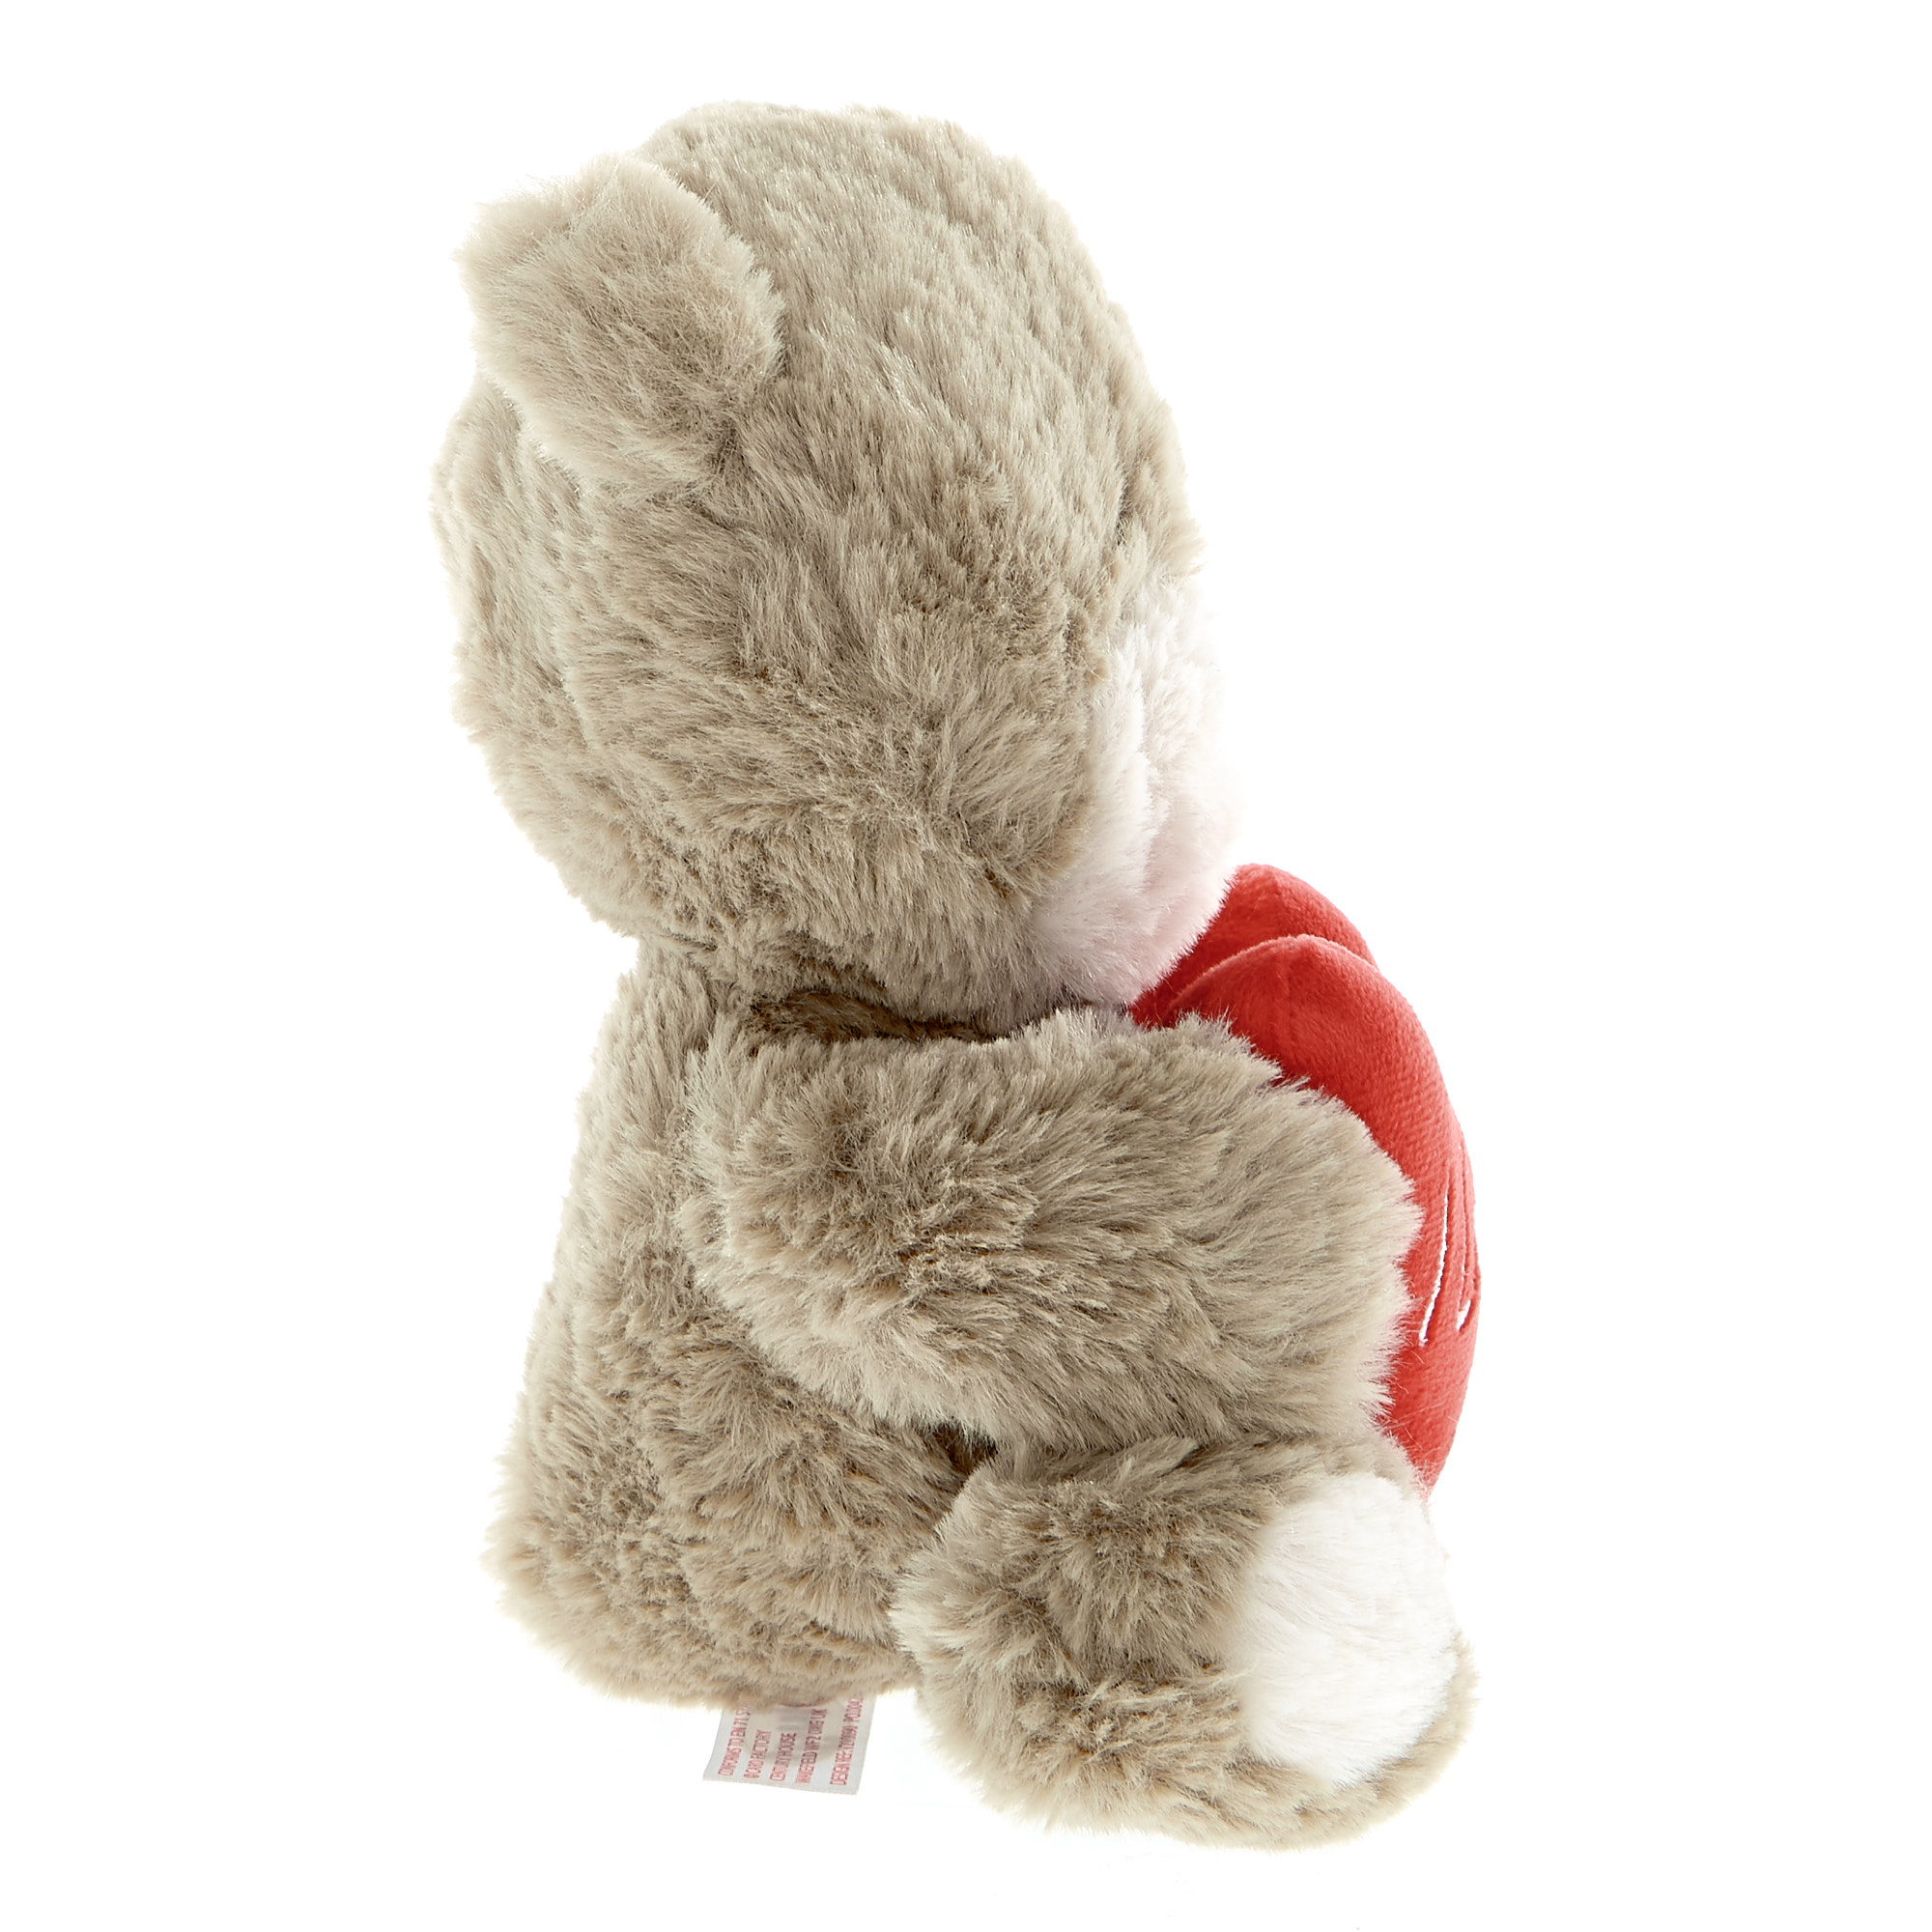 Buy Hugs Bear Soft Toy - I Love You for GBP 2.99 | Card Factory UK